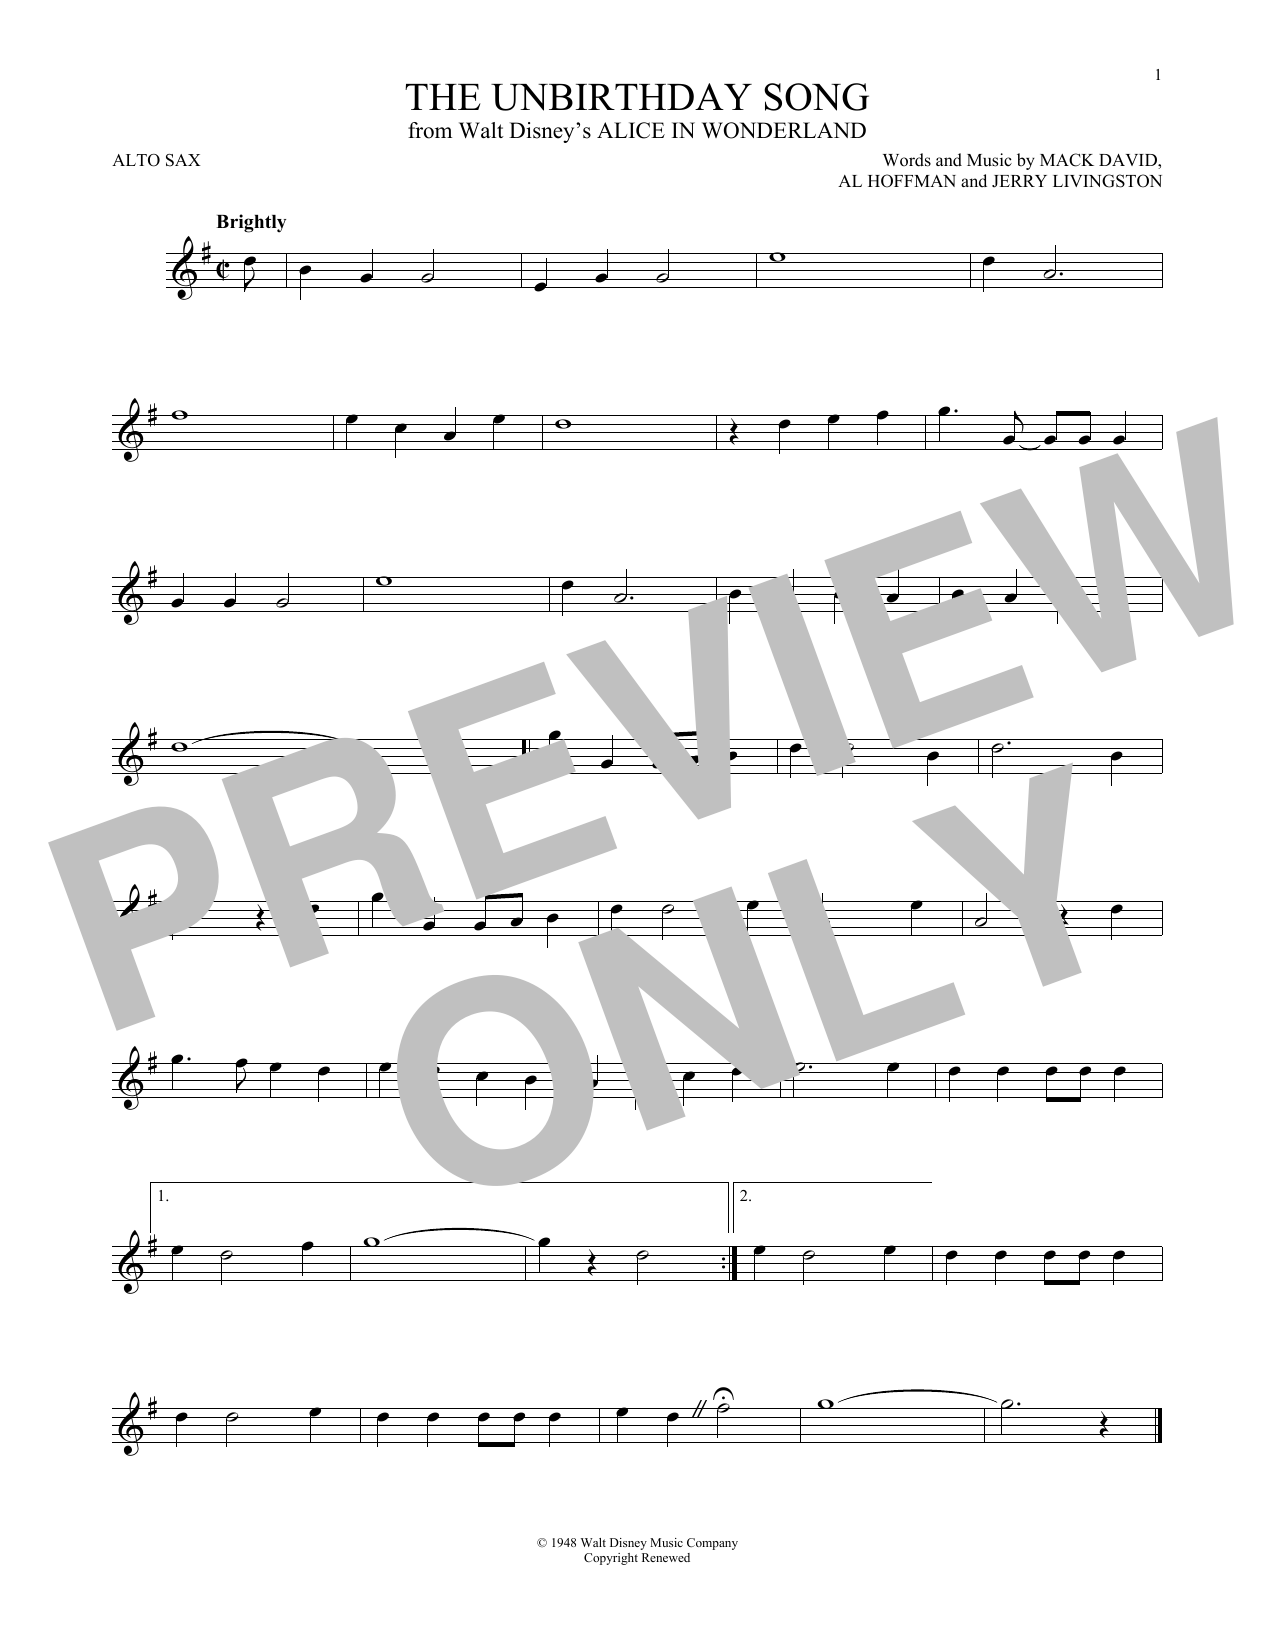 Download Mack David, Al Hoffman and Jerry Liv The Unbirthday Song (from Disney's Alic Sheet Music